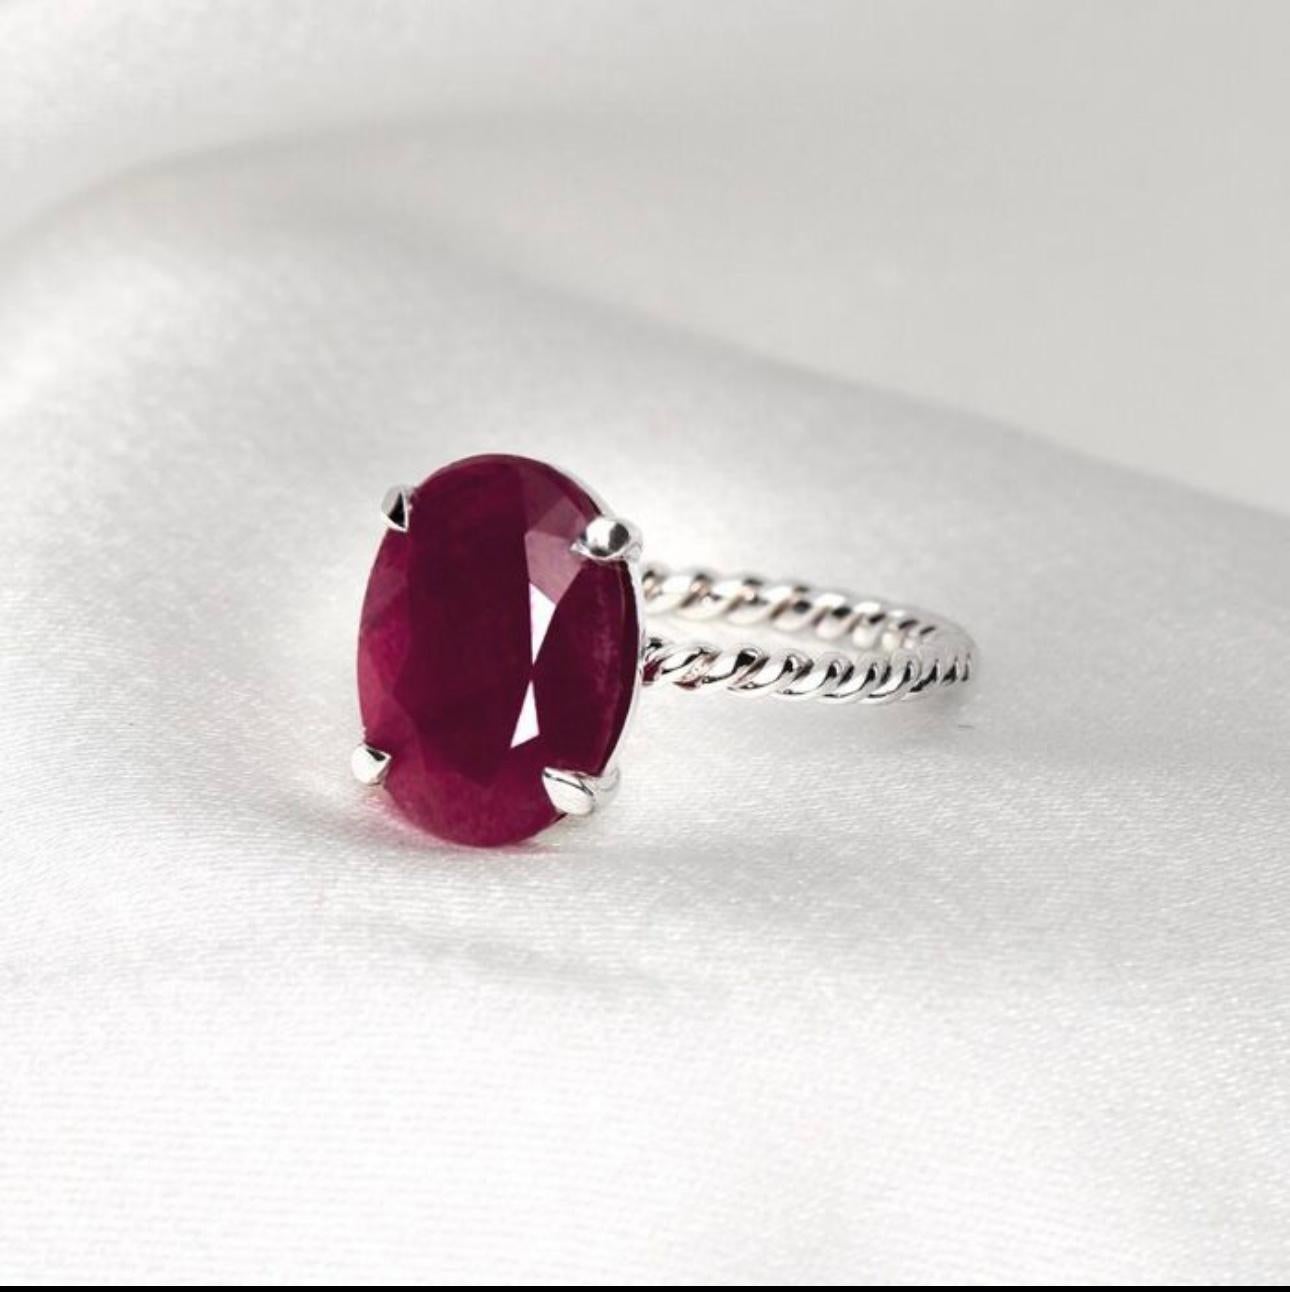 Beautiful 14 K white gold ring, which represents a natural not heated and not treated  certified natural ruby. The weight of the gem is 5.97 Carats. The dimension of this mixed cut oval ruby is 12.65 mm x 9.42 mm x 5.47mm. 

The elegance and